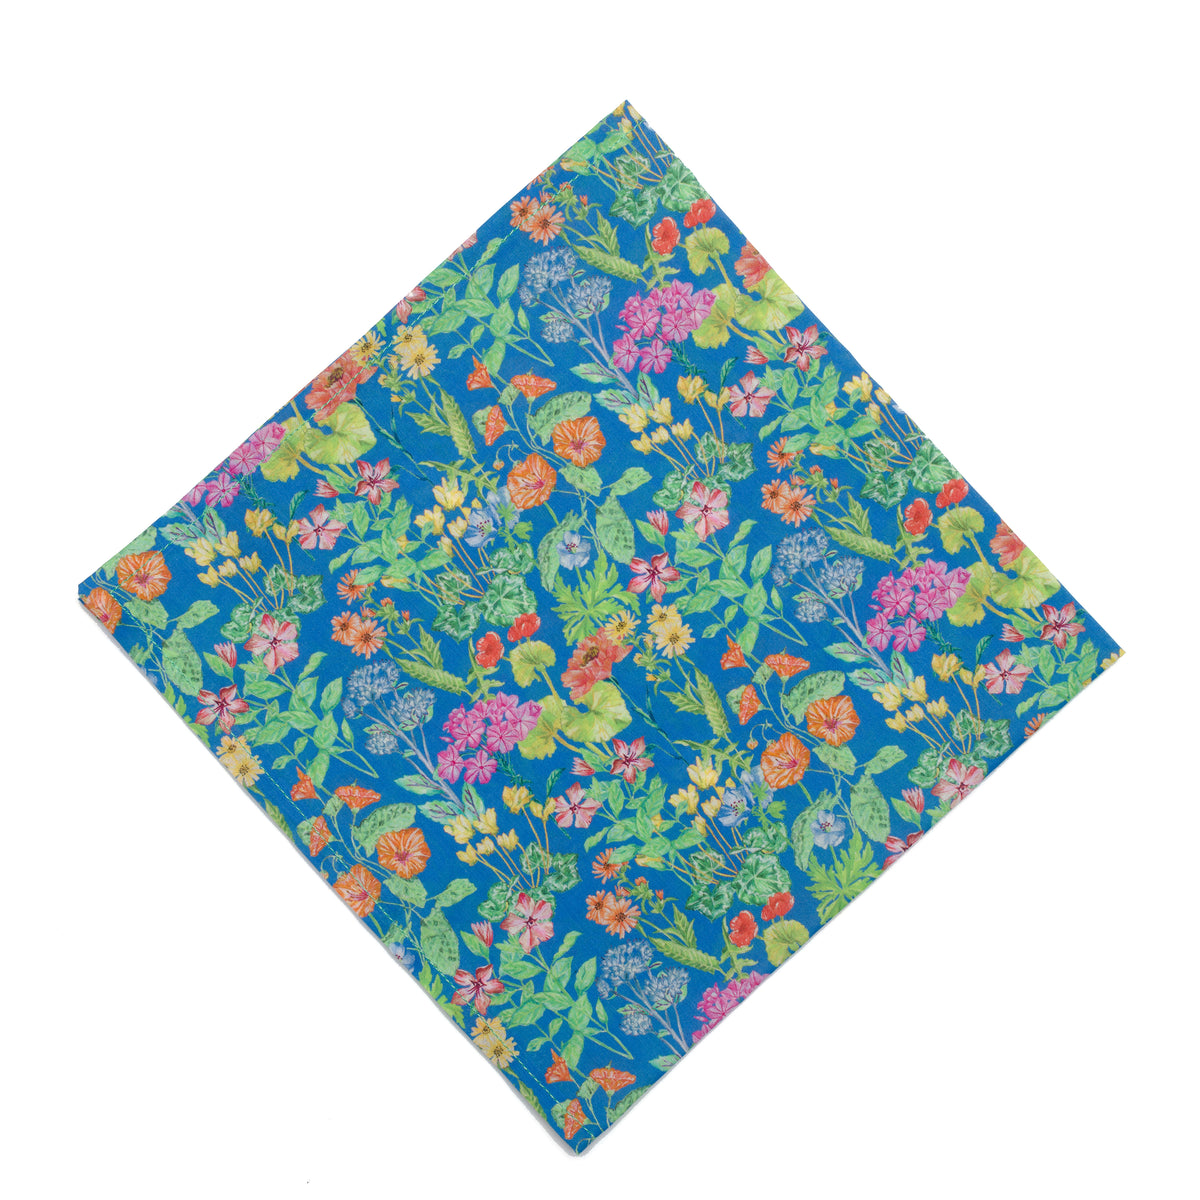 LIBERTY OF LONDON Poet's Meadow POCKET SQUARE Sale price